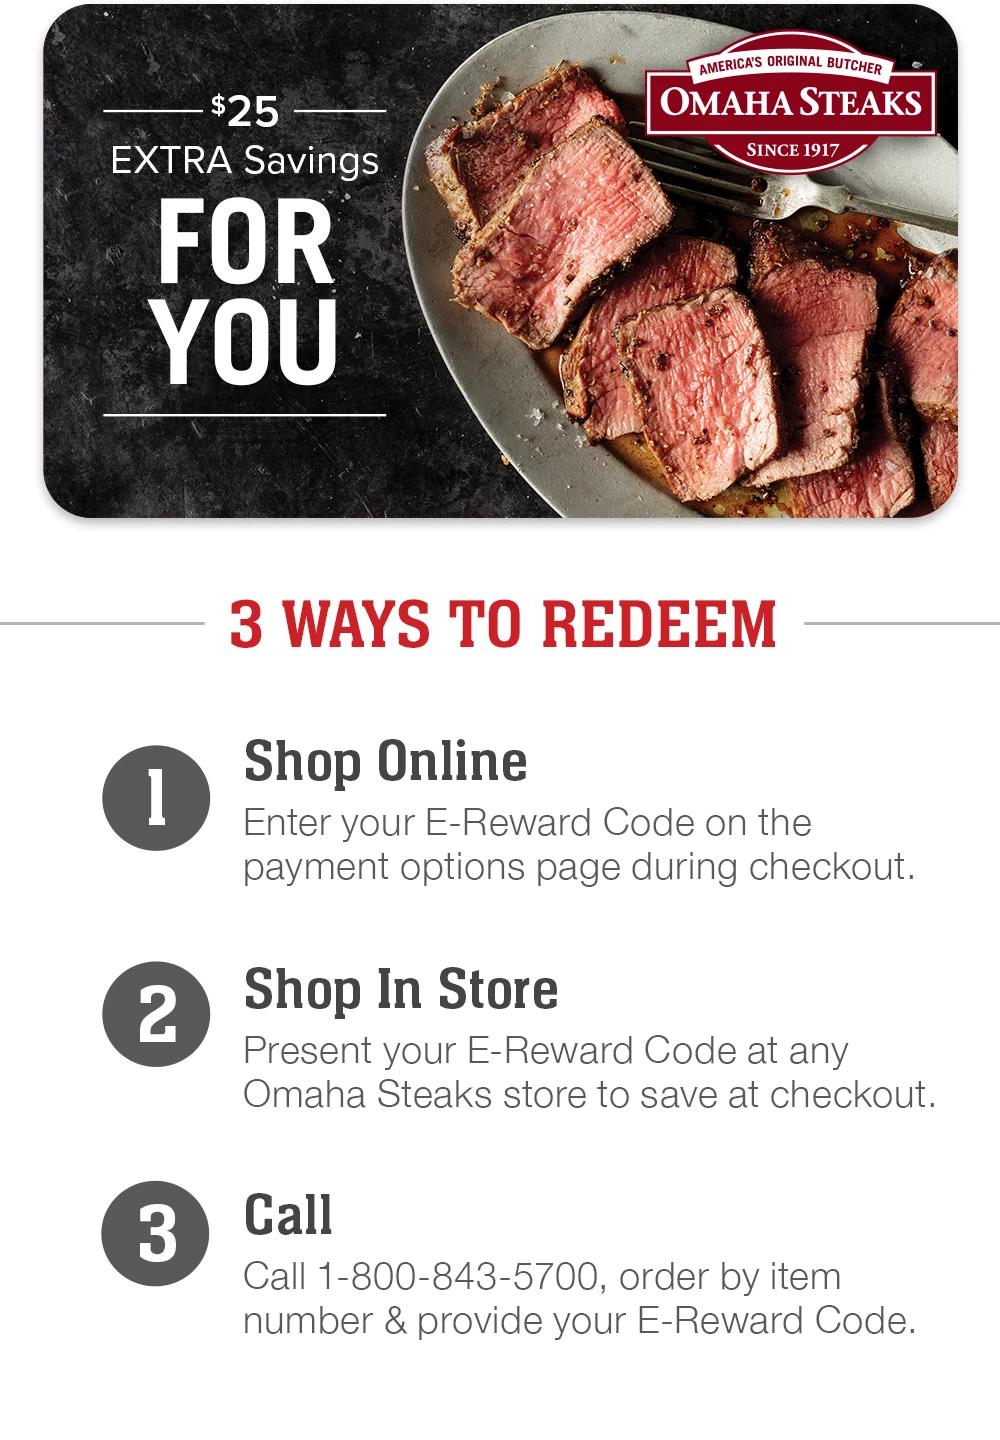 Save on gifts with this $30 Reward Card! - Omaha Steaks